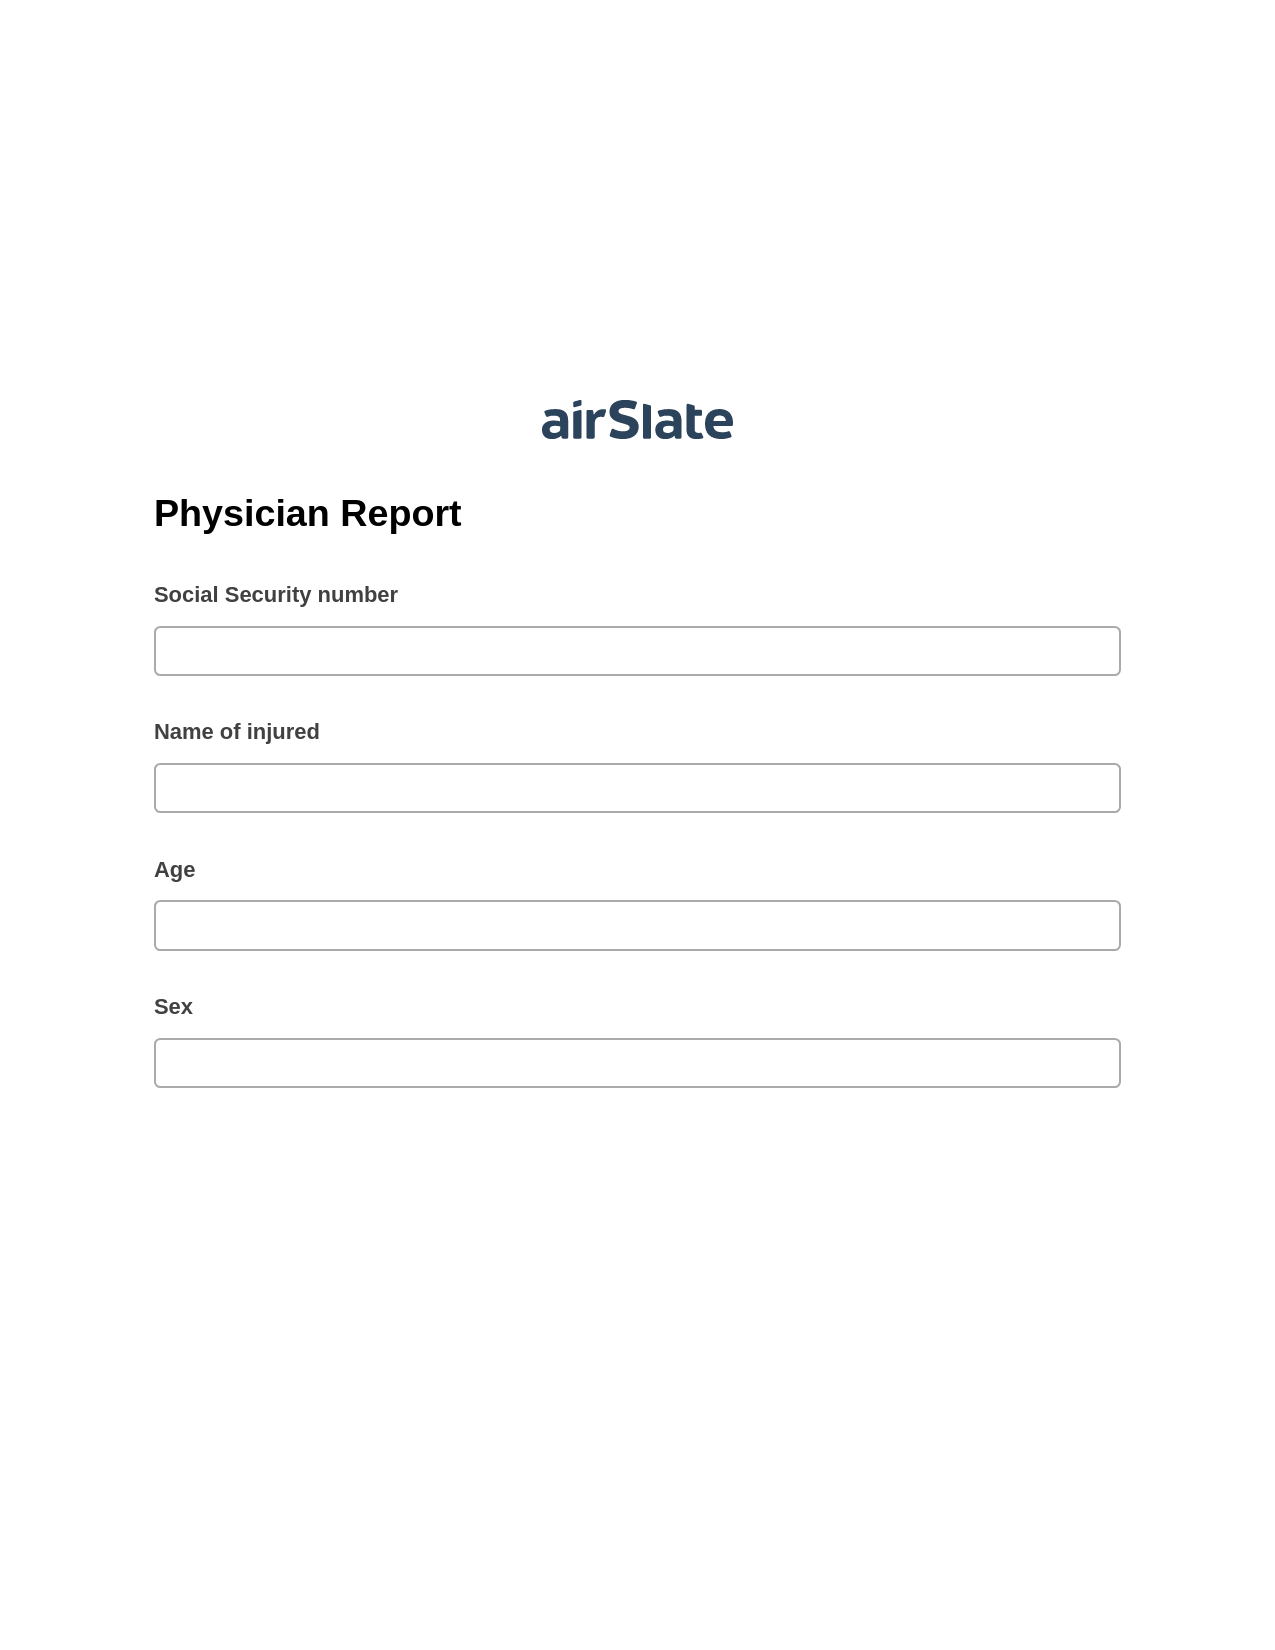 Physician Report Pre-fill from Google Sheets Bot, Email Notification Bot, Export to Excel 365 Bot